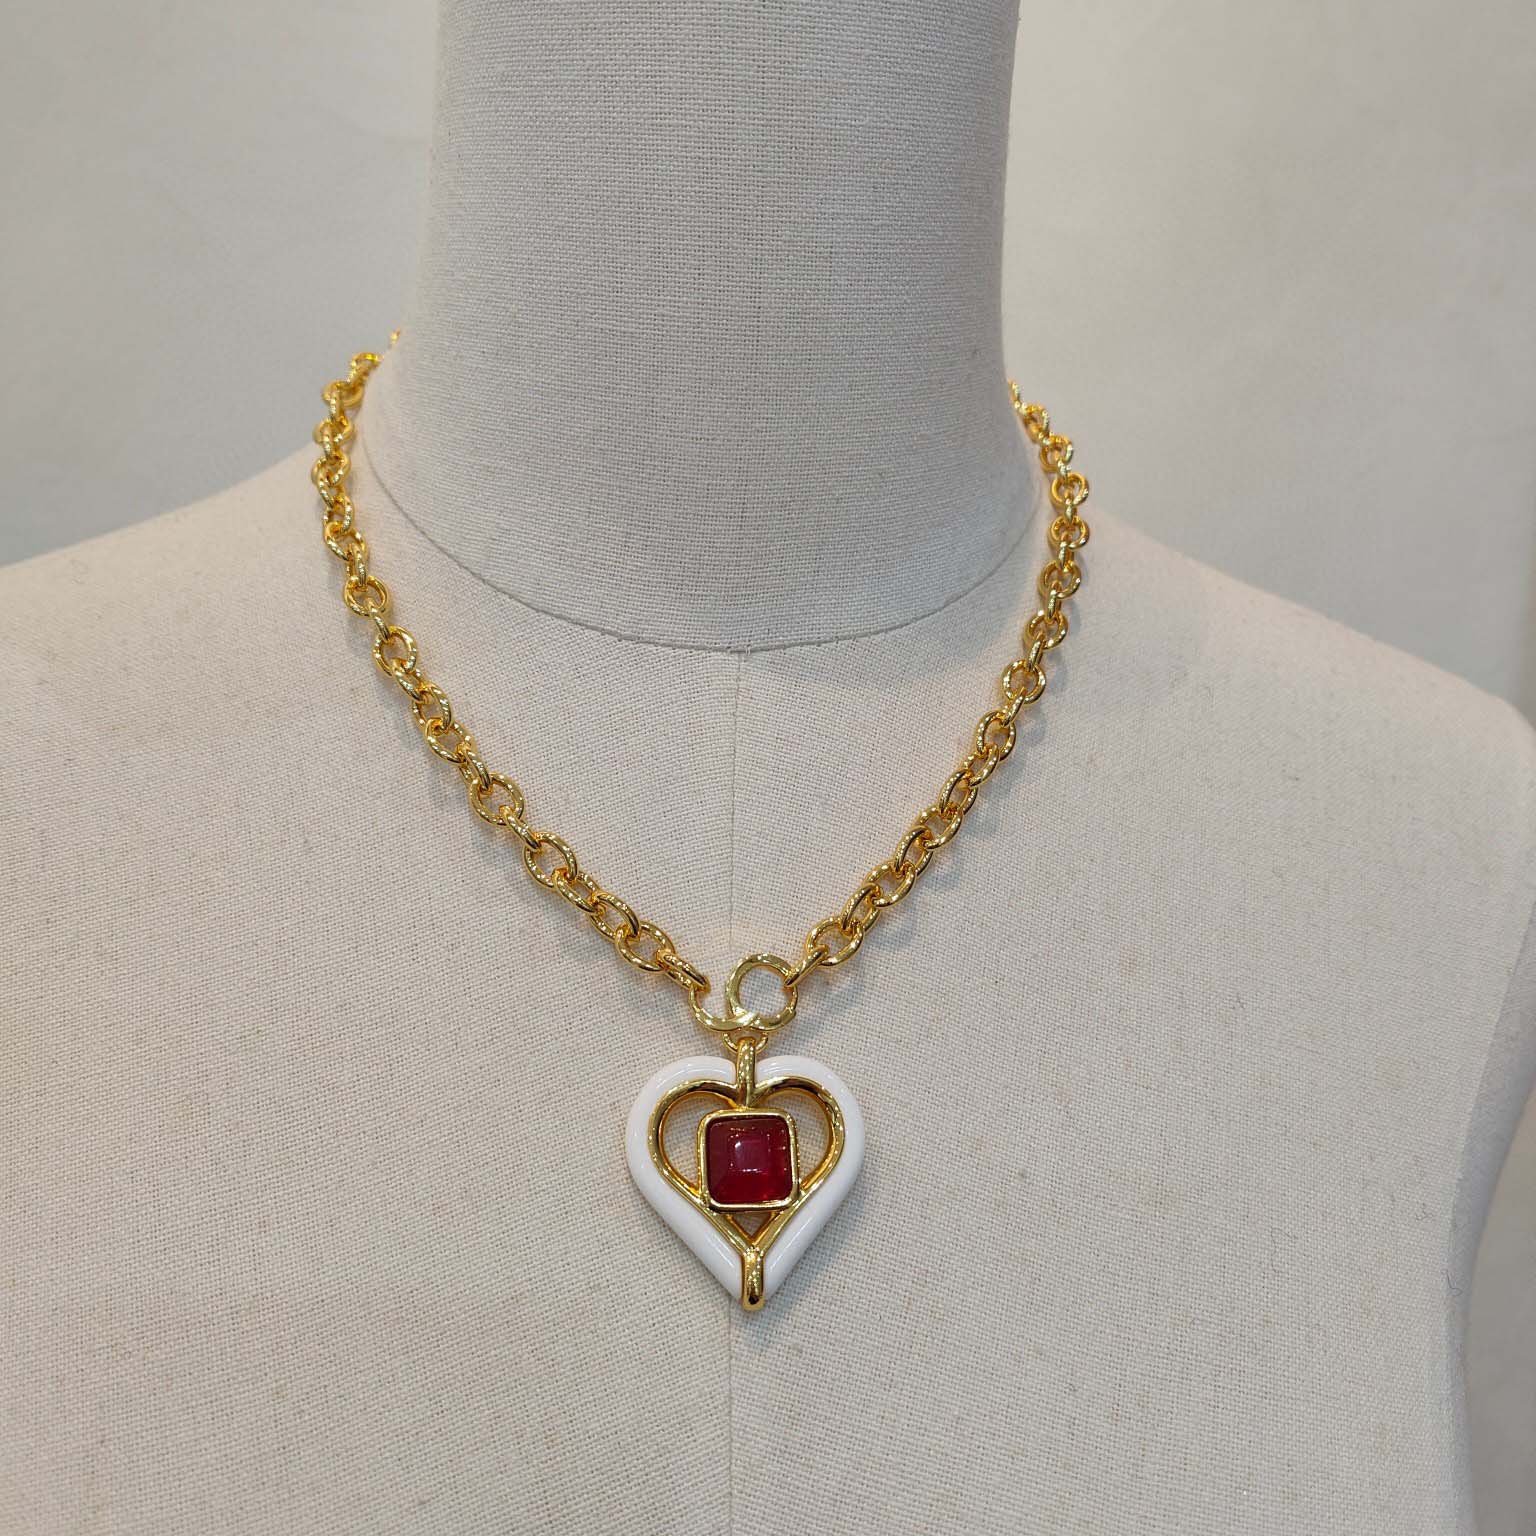 2023 Luxury quality Charm heart shape pendant necklace with red and white color drop earring in 18k gold plated have stamp box PS7232f